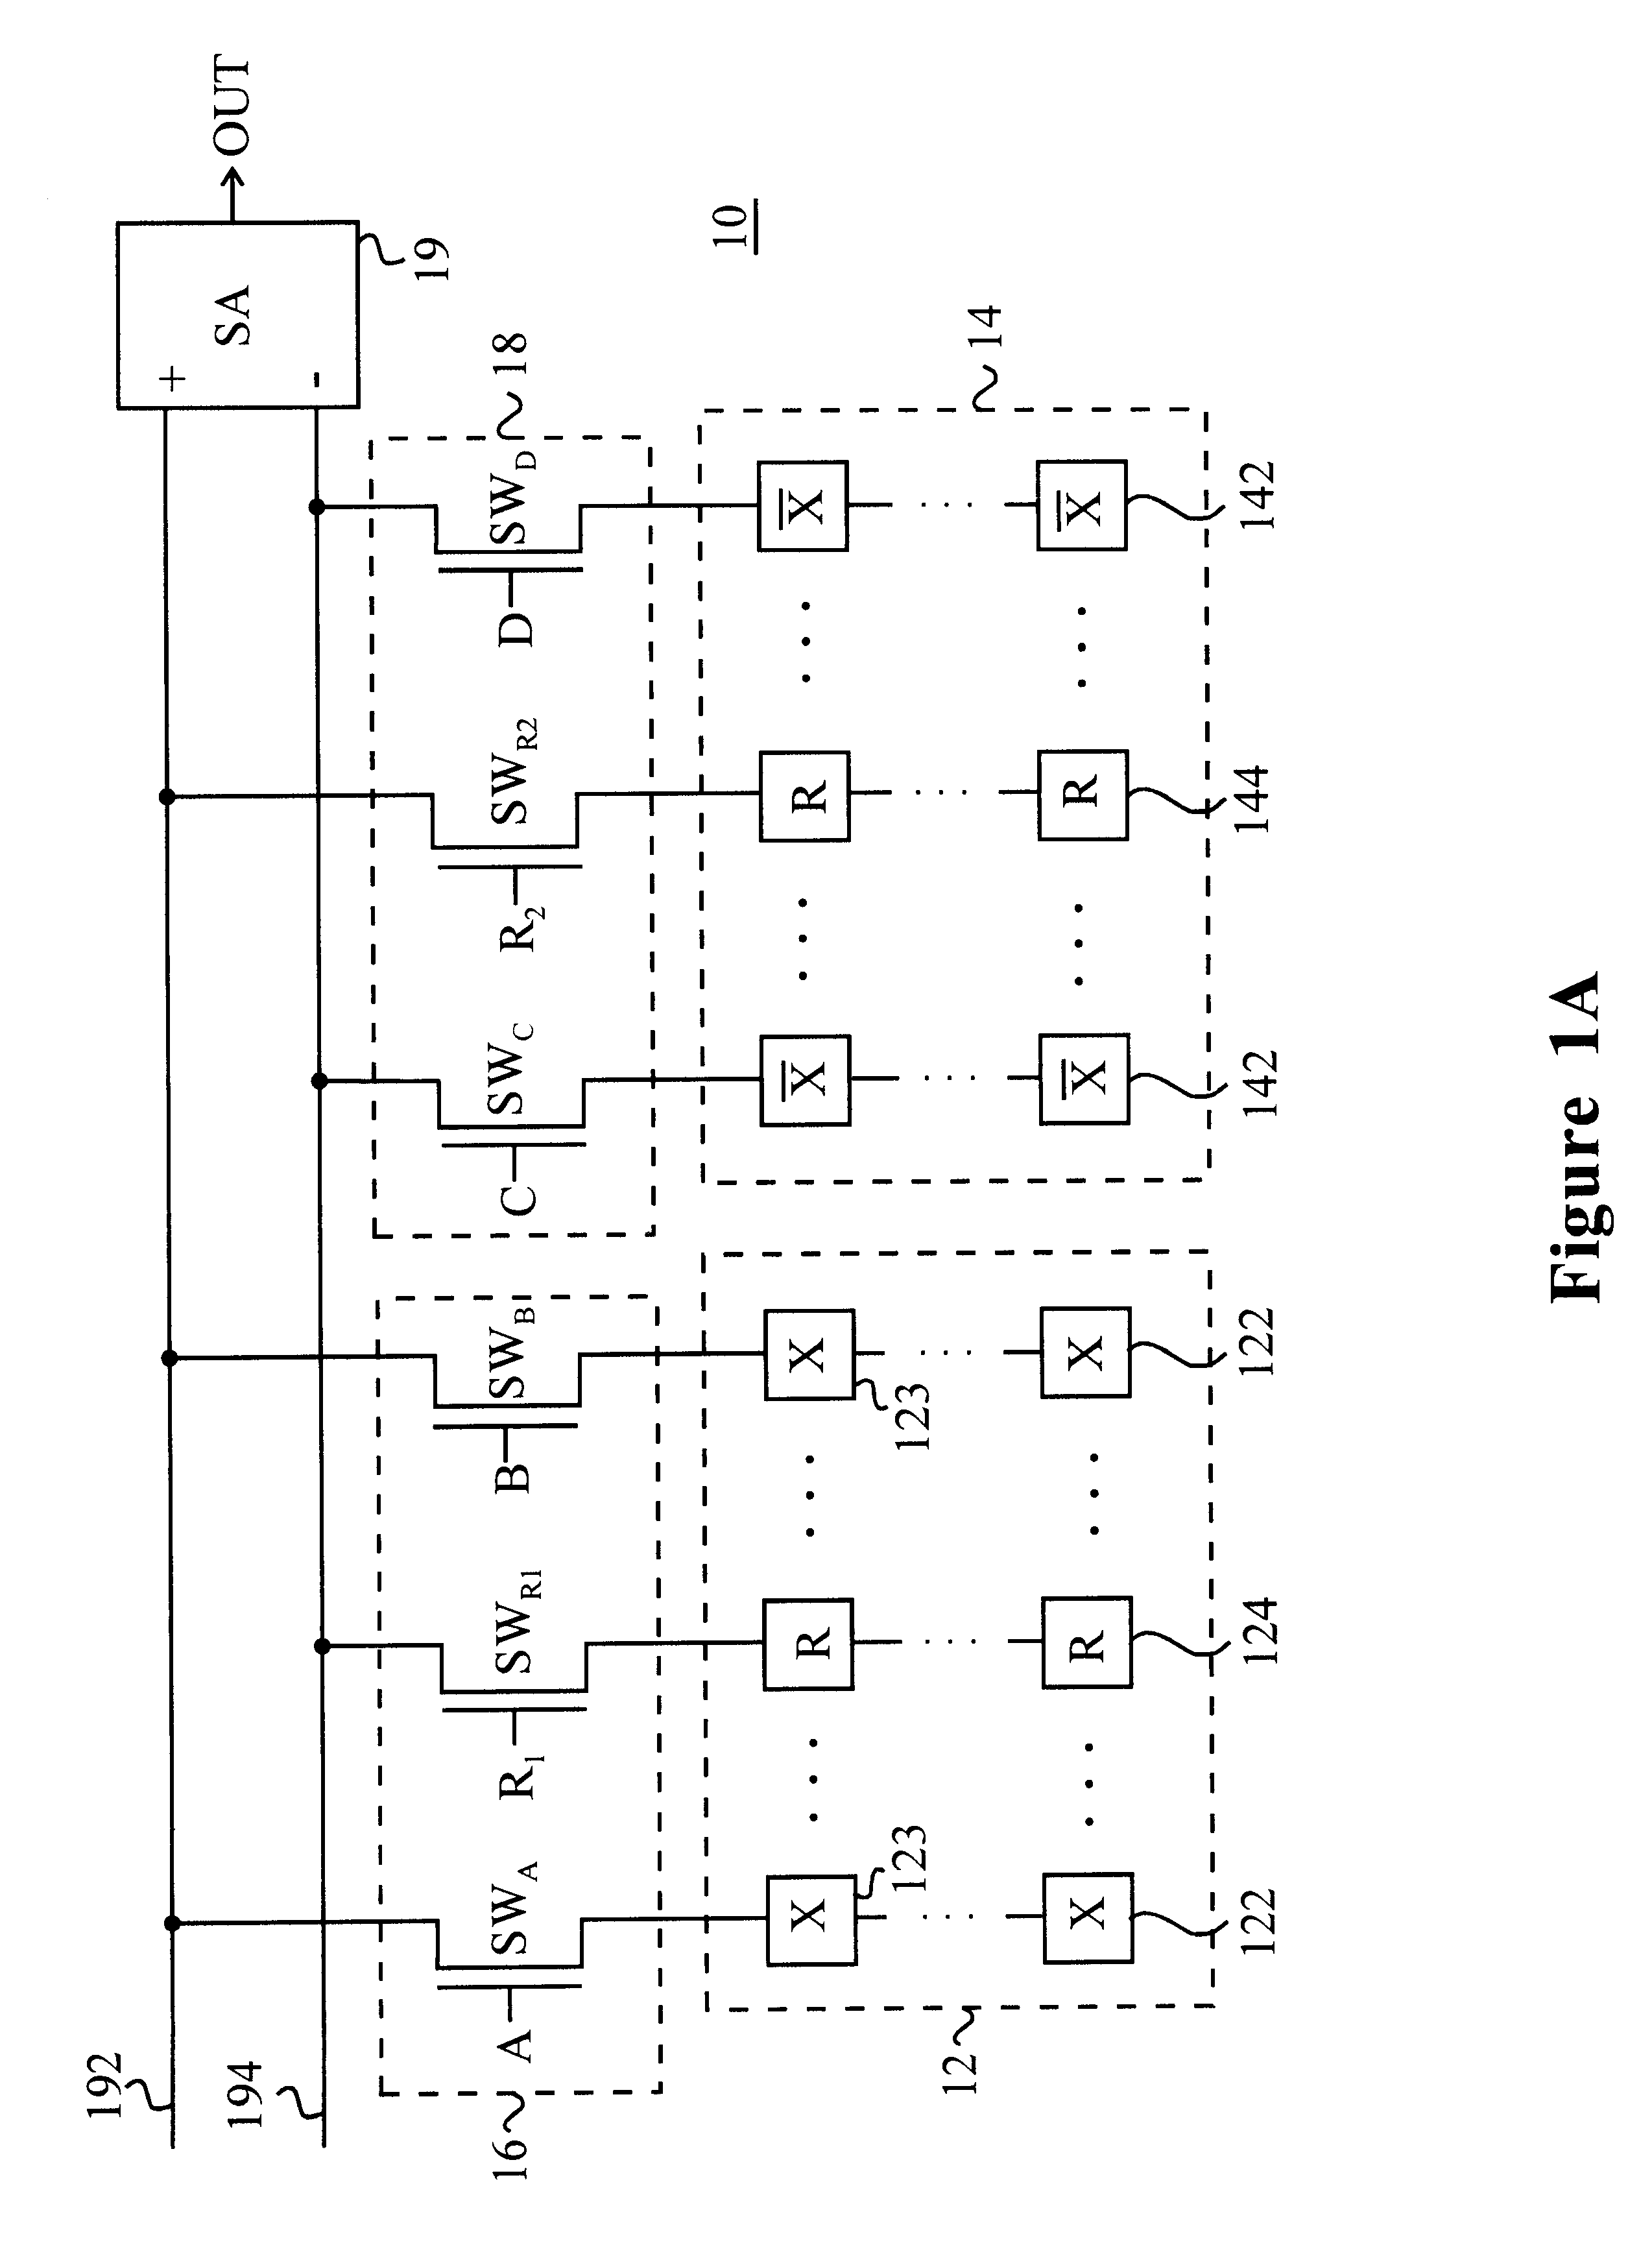 Interconnection network for connecting memory cells to sense amplifiers